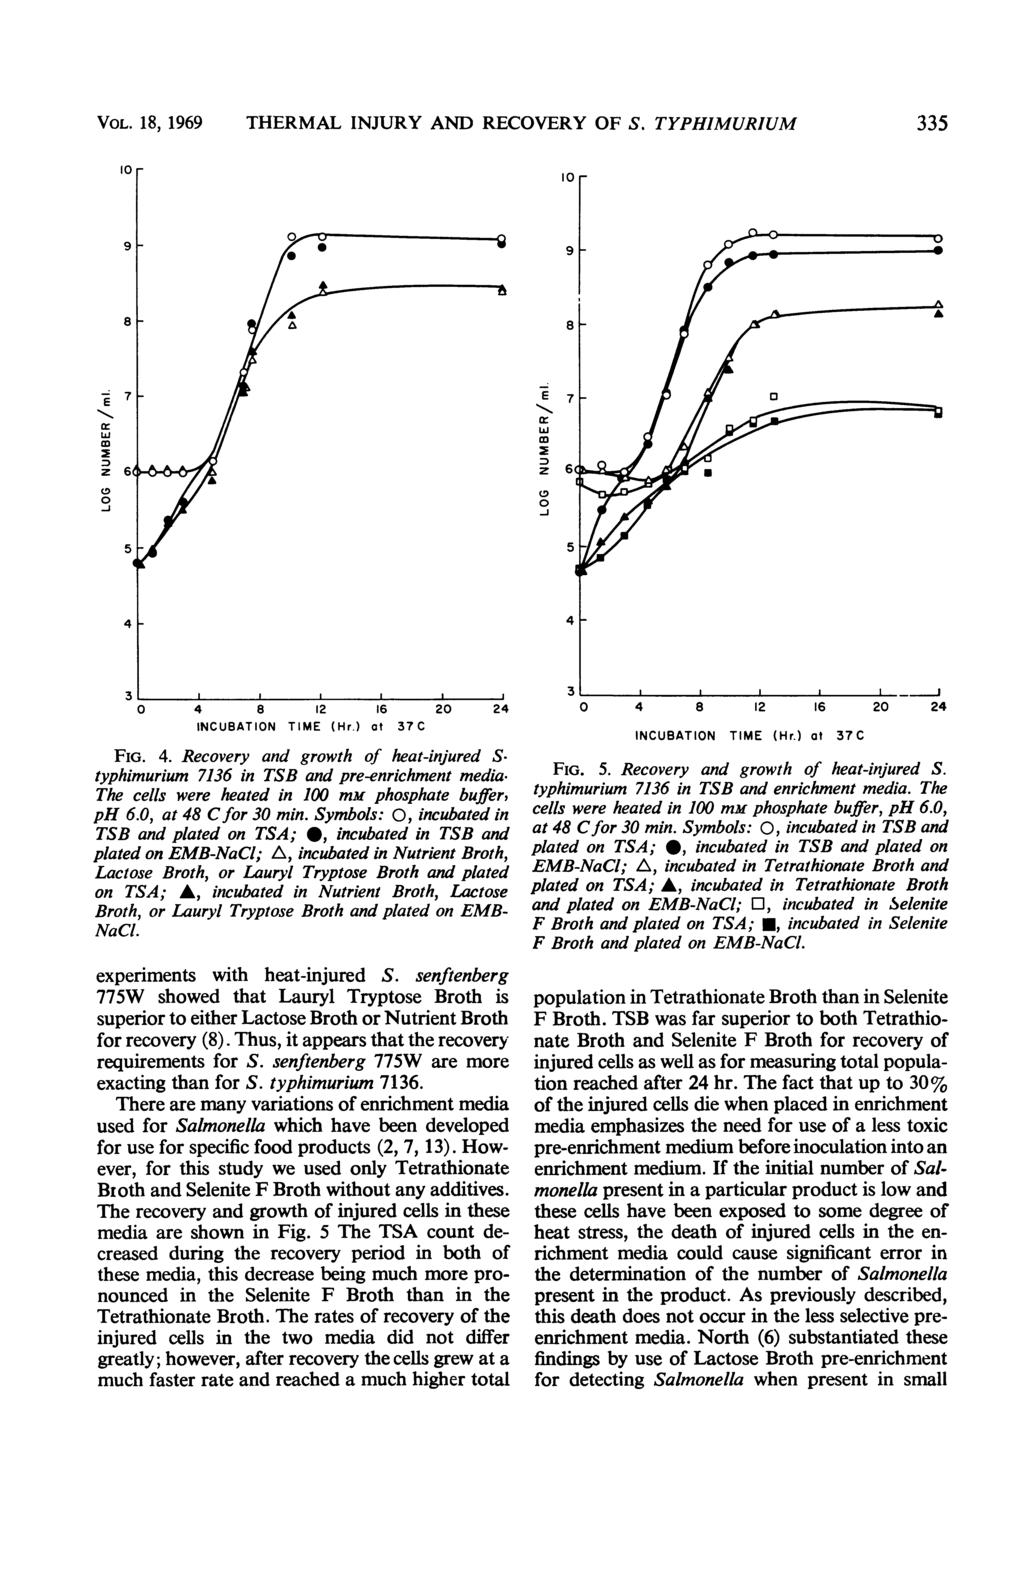 VOL. 18, 1969 THERMAL INJURY AND RECOVERY OF S. TYPHIMURIUM 335 1 11 9 8 J o E~~~ 7 6 4 _ ff 3 4 8 12 16 2 24 FIG. 4. Recovery and growth of heat-injured S.